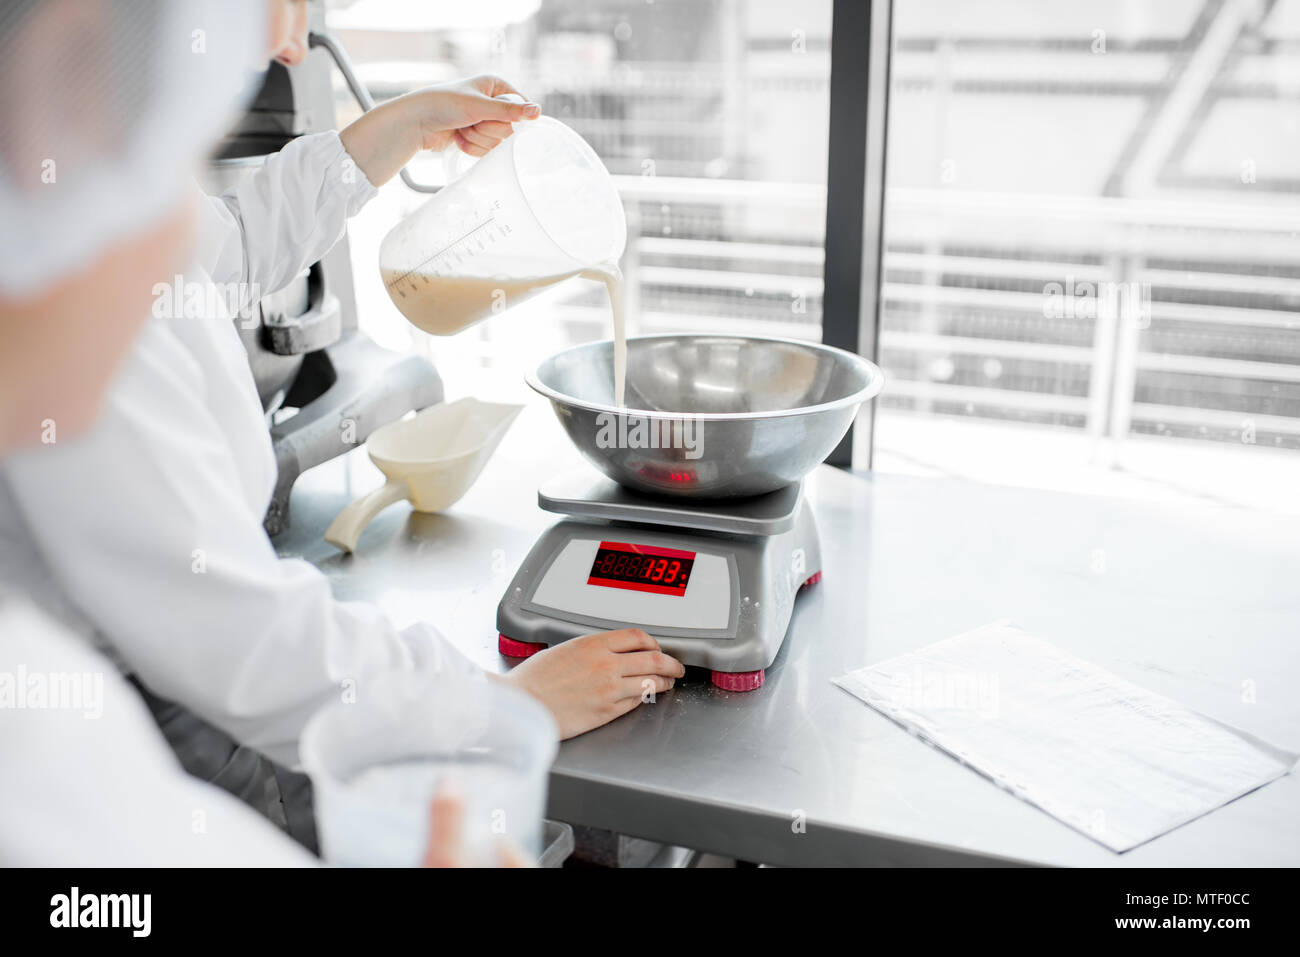 Weighing ingredients for baking at the manufacturing Stock Photo